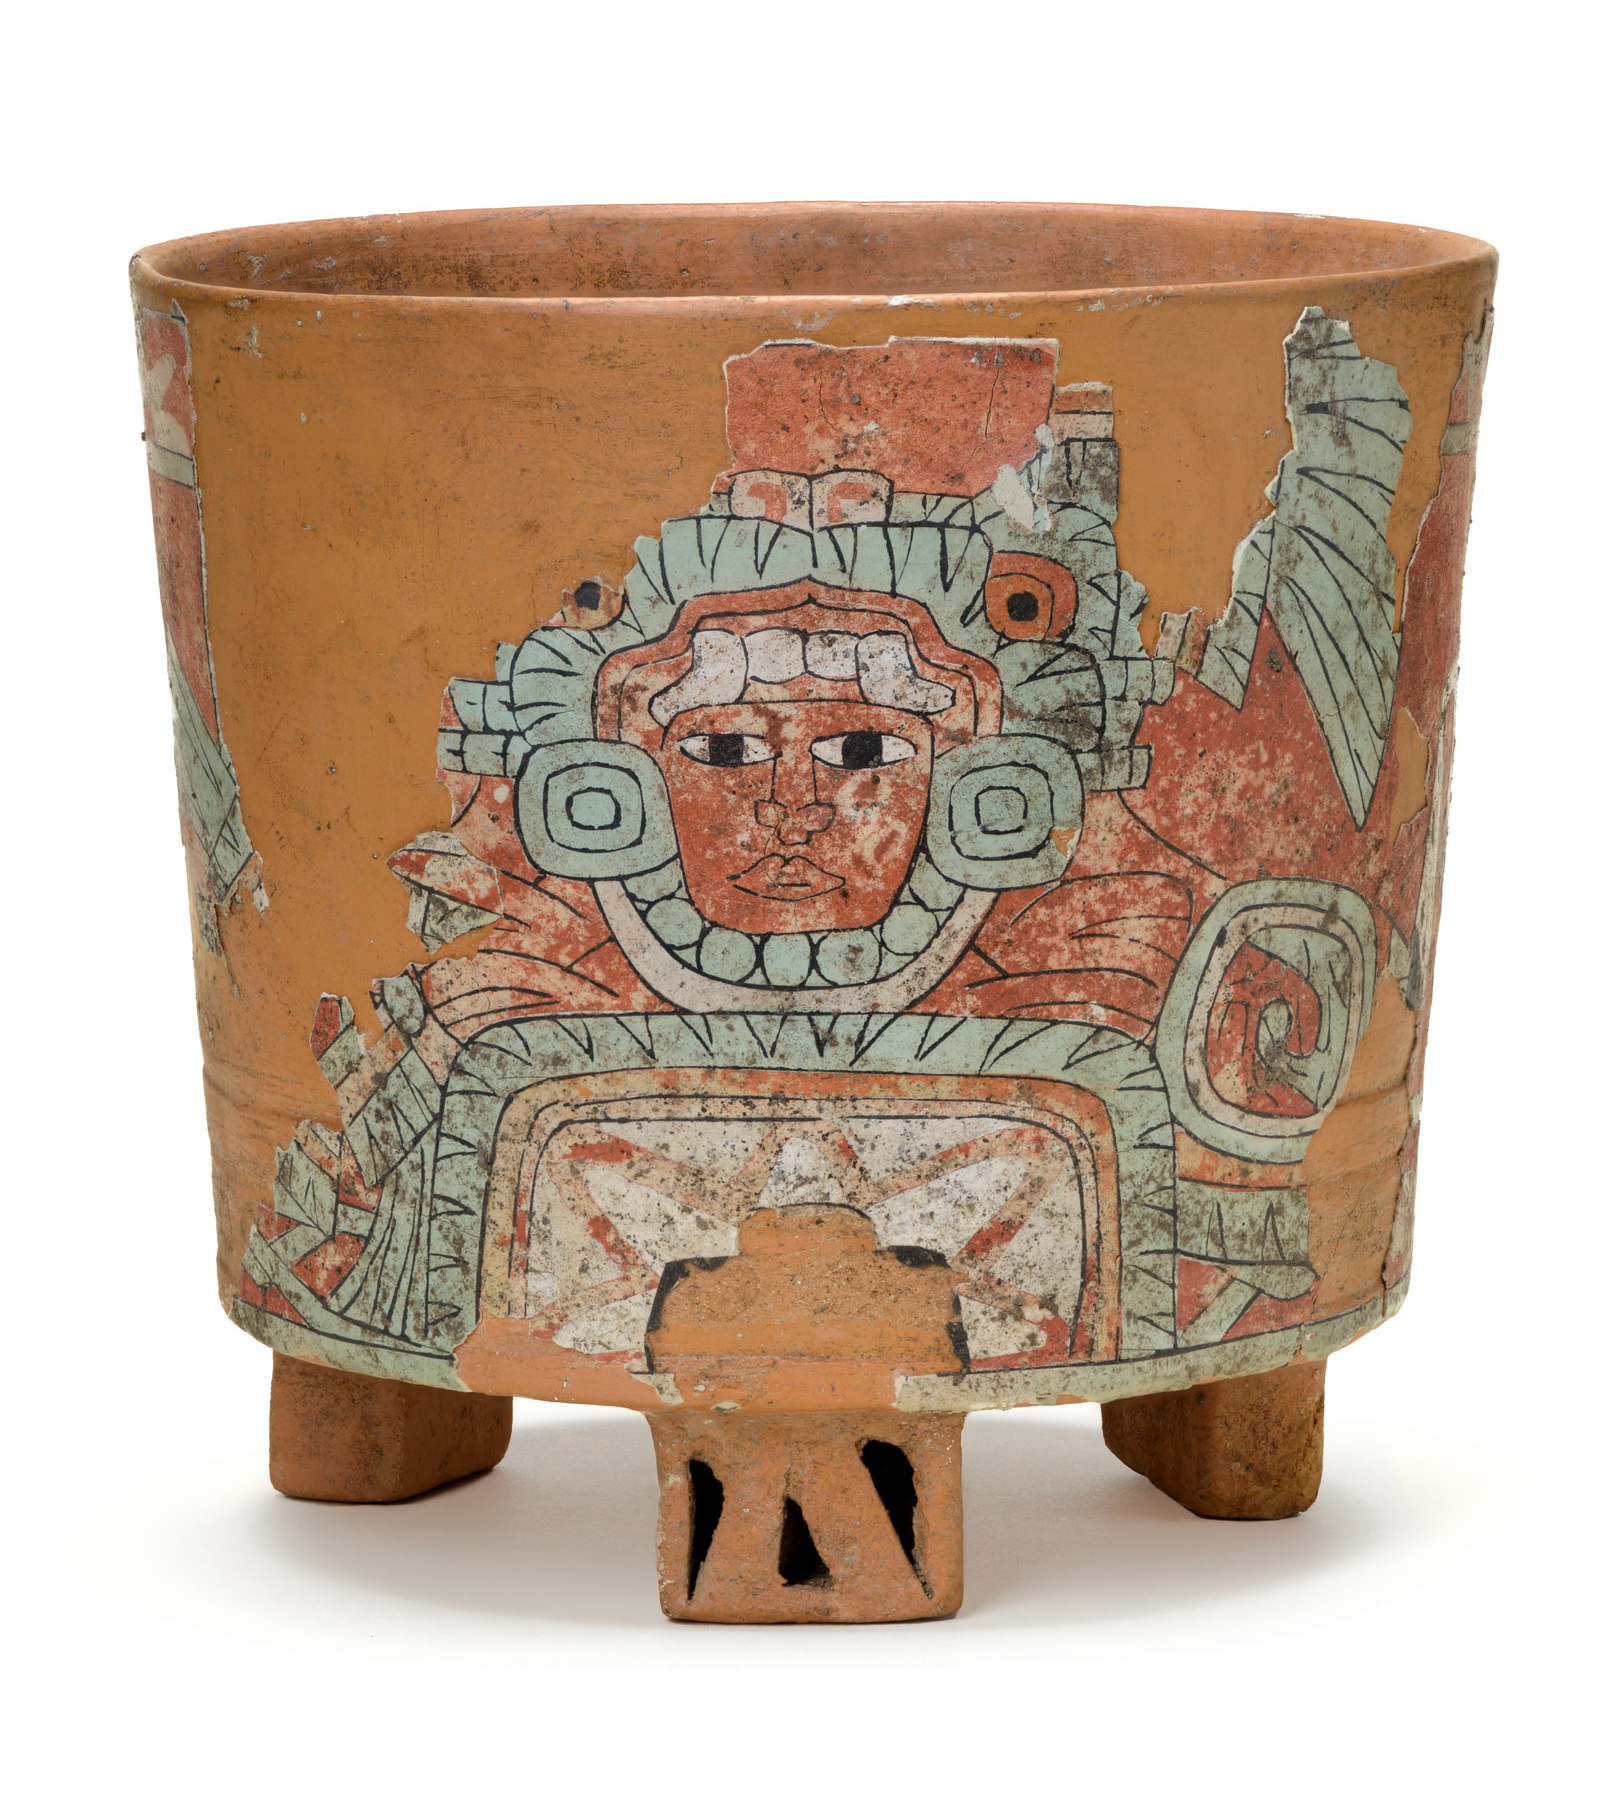 Tripod Vessel with Image of Warrior, 450–650, Teotihuacan, Los Angeles County Museum of Art, gift of Constance McCormick Fearing, photo © Museum Associates/LACMA